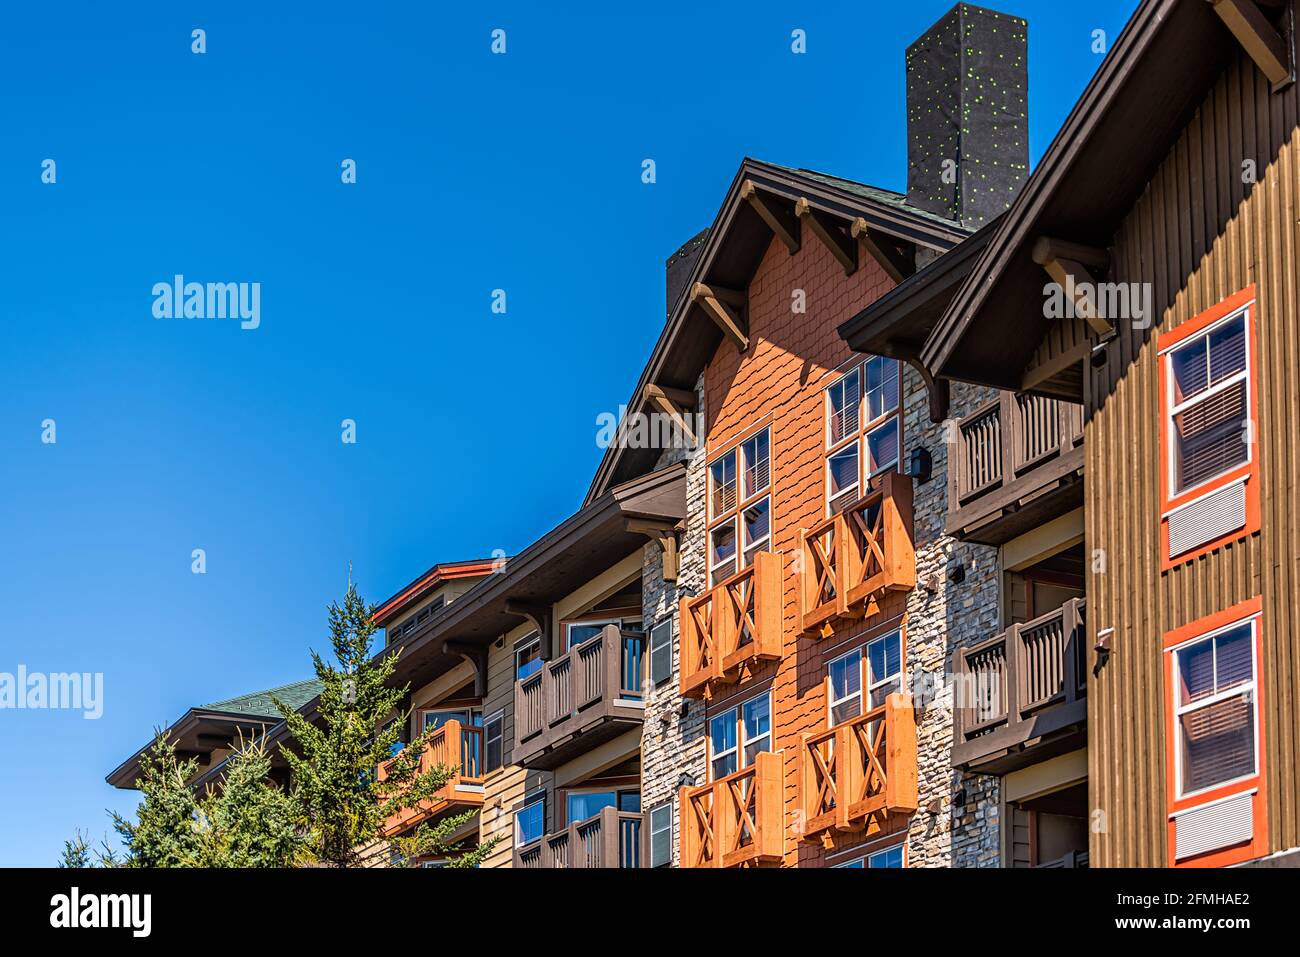 Apartment condo condominium building lodge in small ski resort town village of Snowshoe, West Virginia looking up low angle view Stock Photo